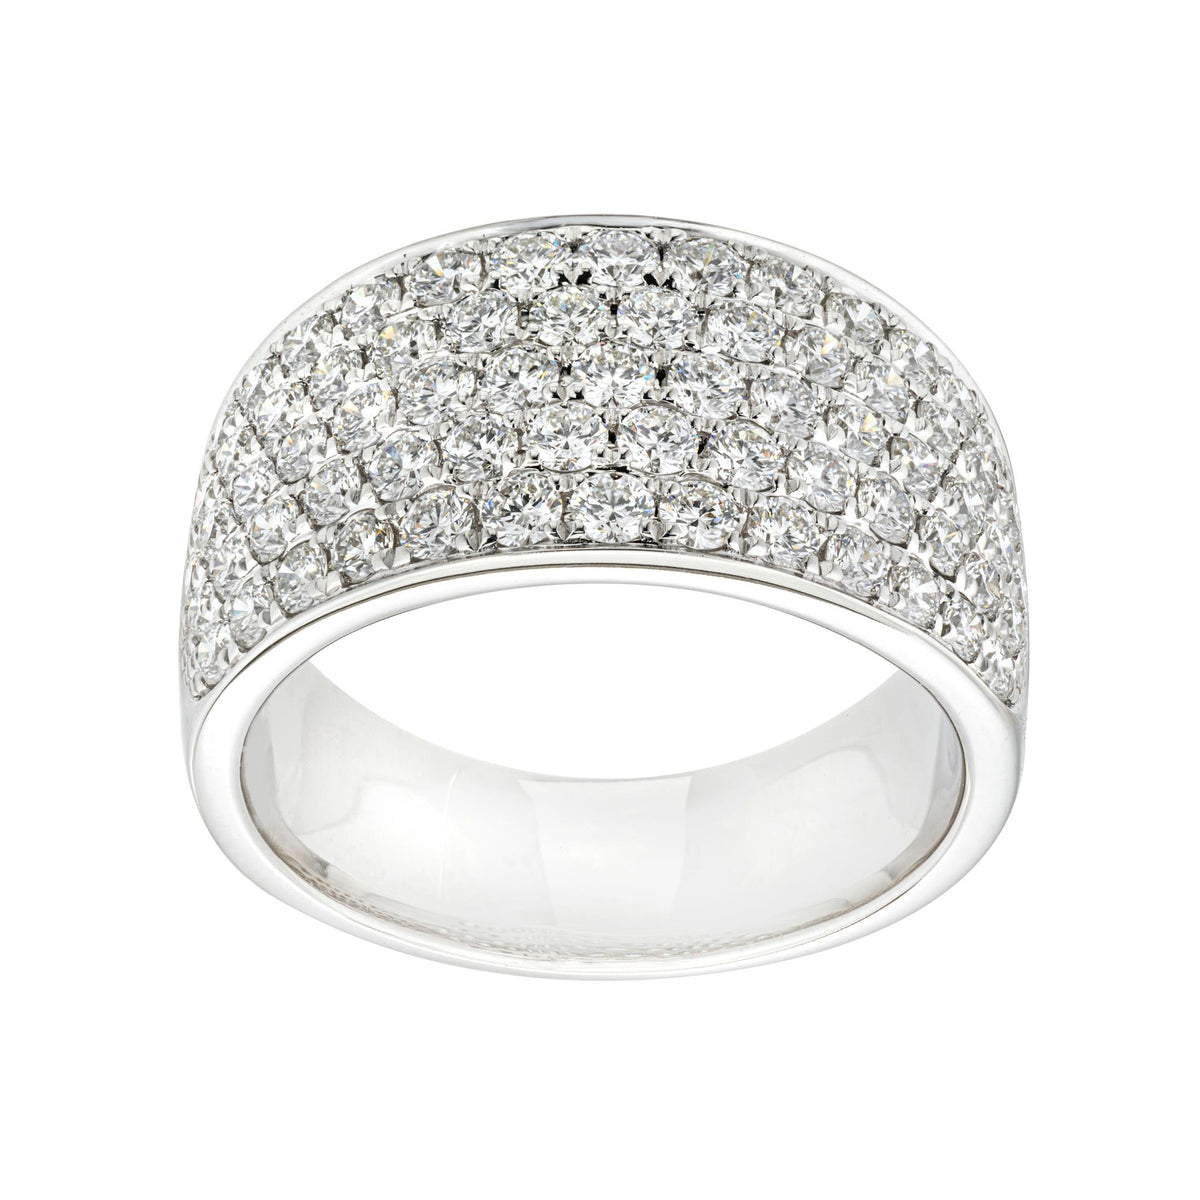 14Kt White Gold Classic Fashion Fashion Ring With 1.50cttw Natural Diamonds